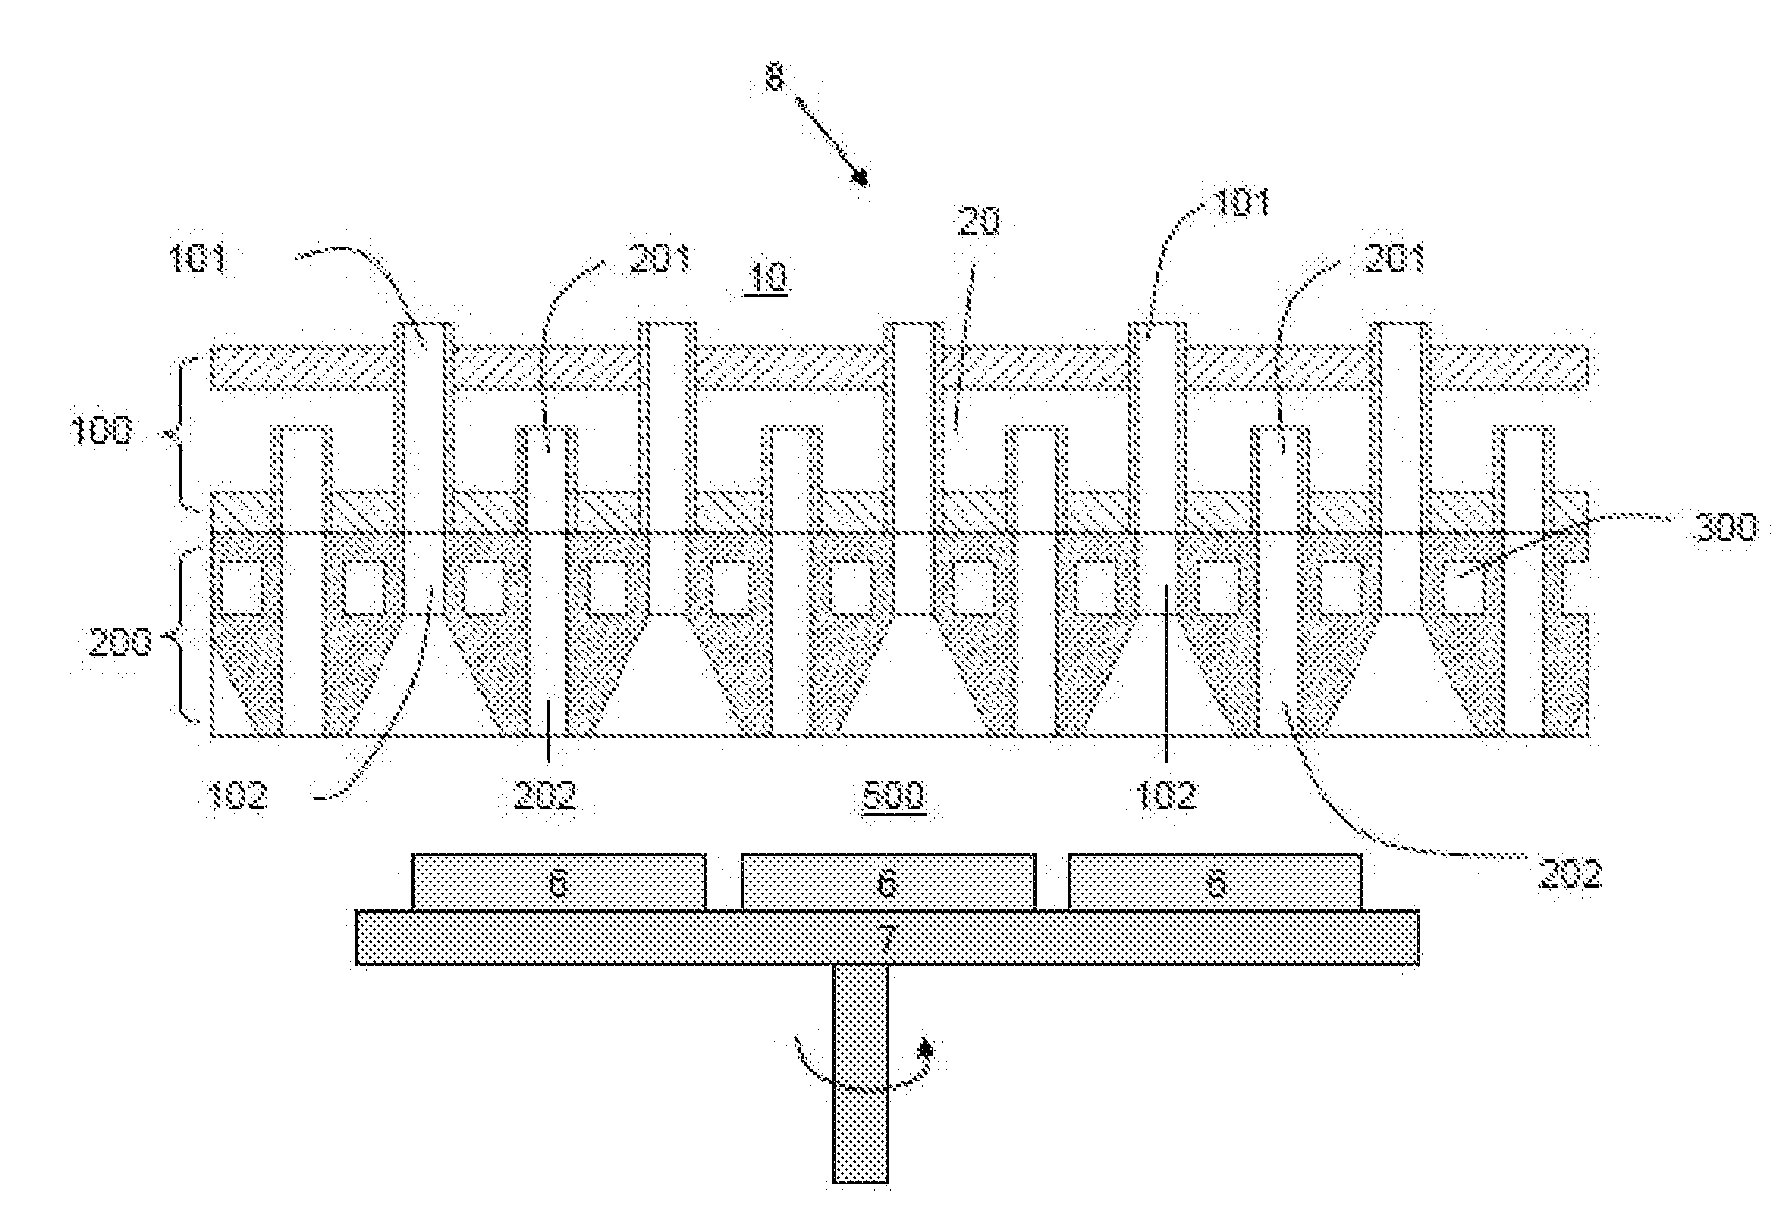 Gas showerhead, method for making the same and thin film growth reactor